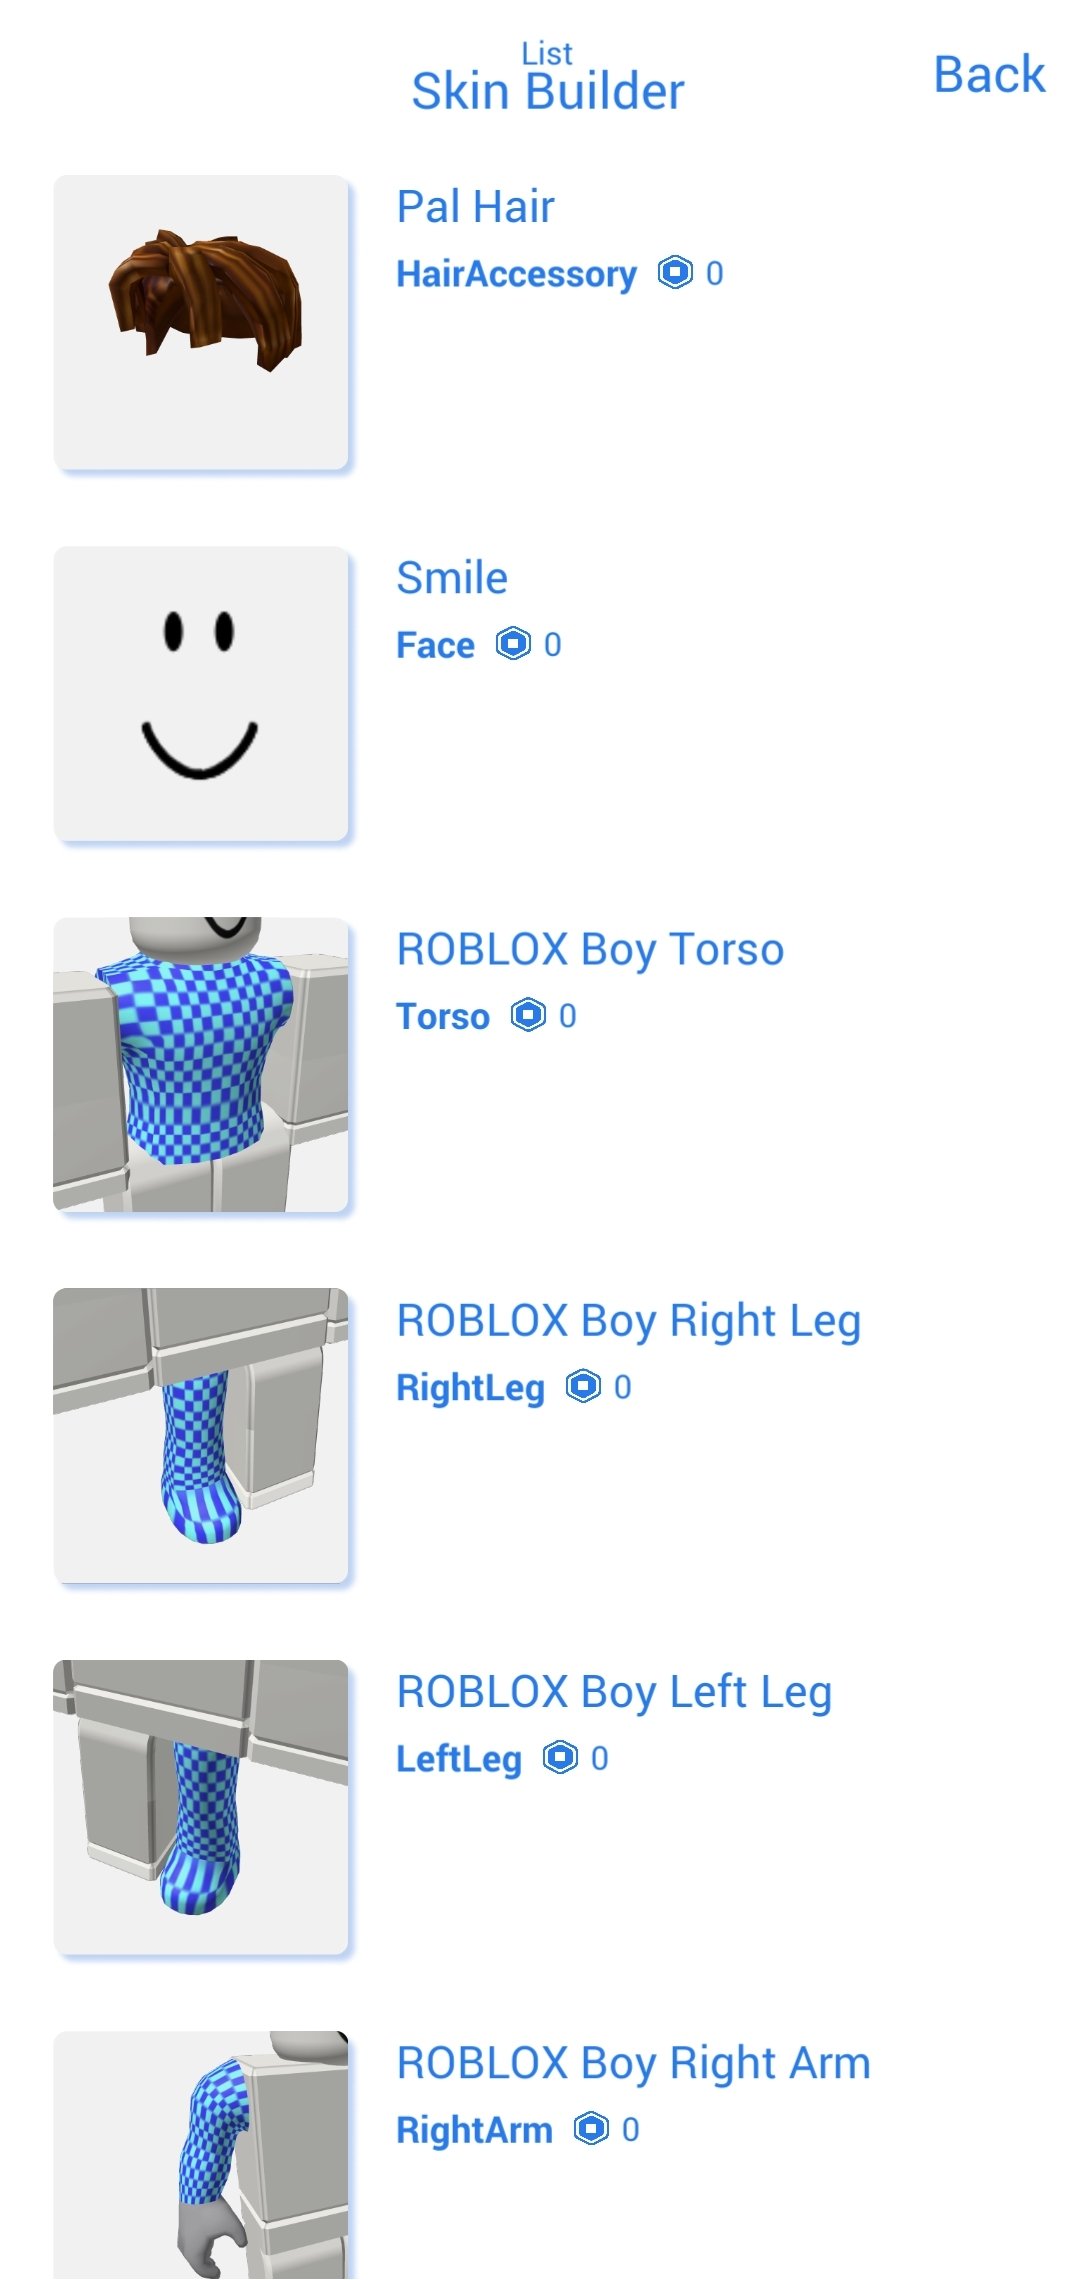 Master mod for roblox for Android - Free App Download